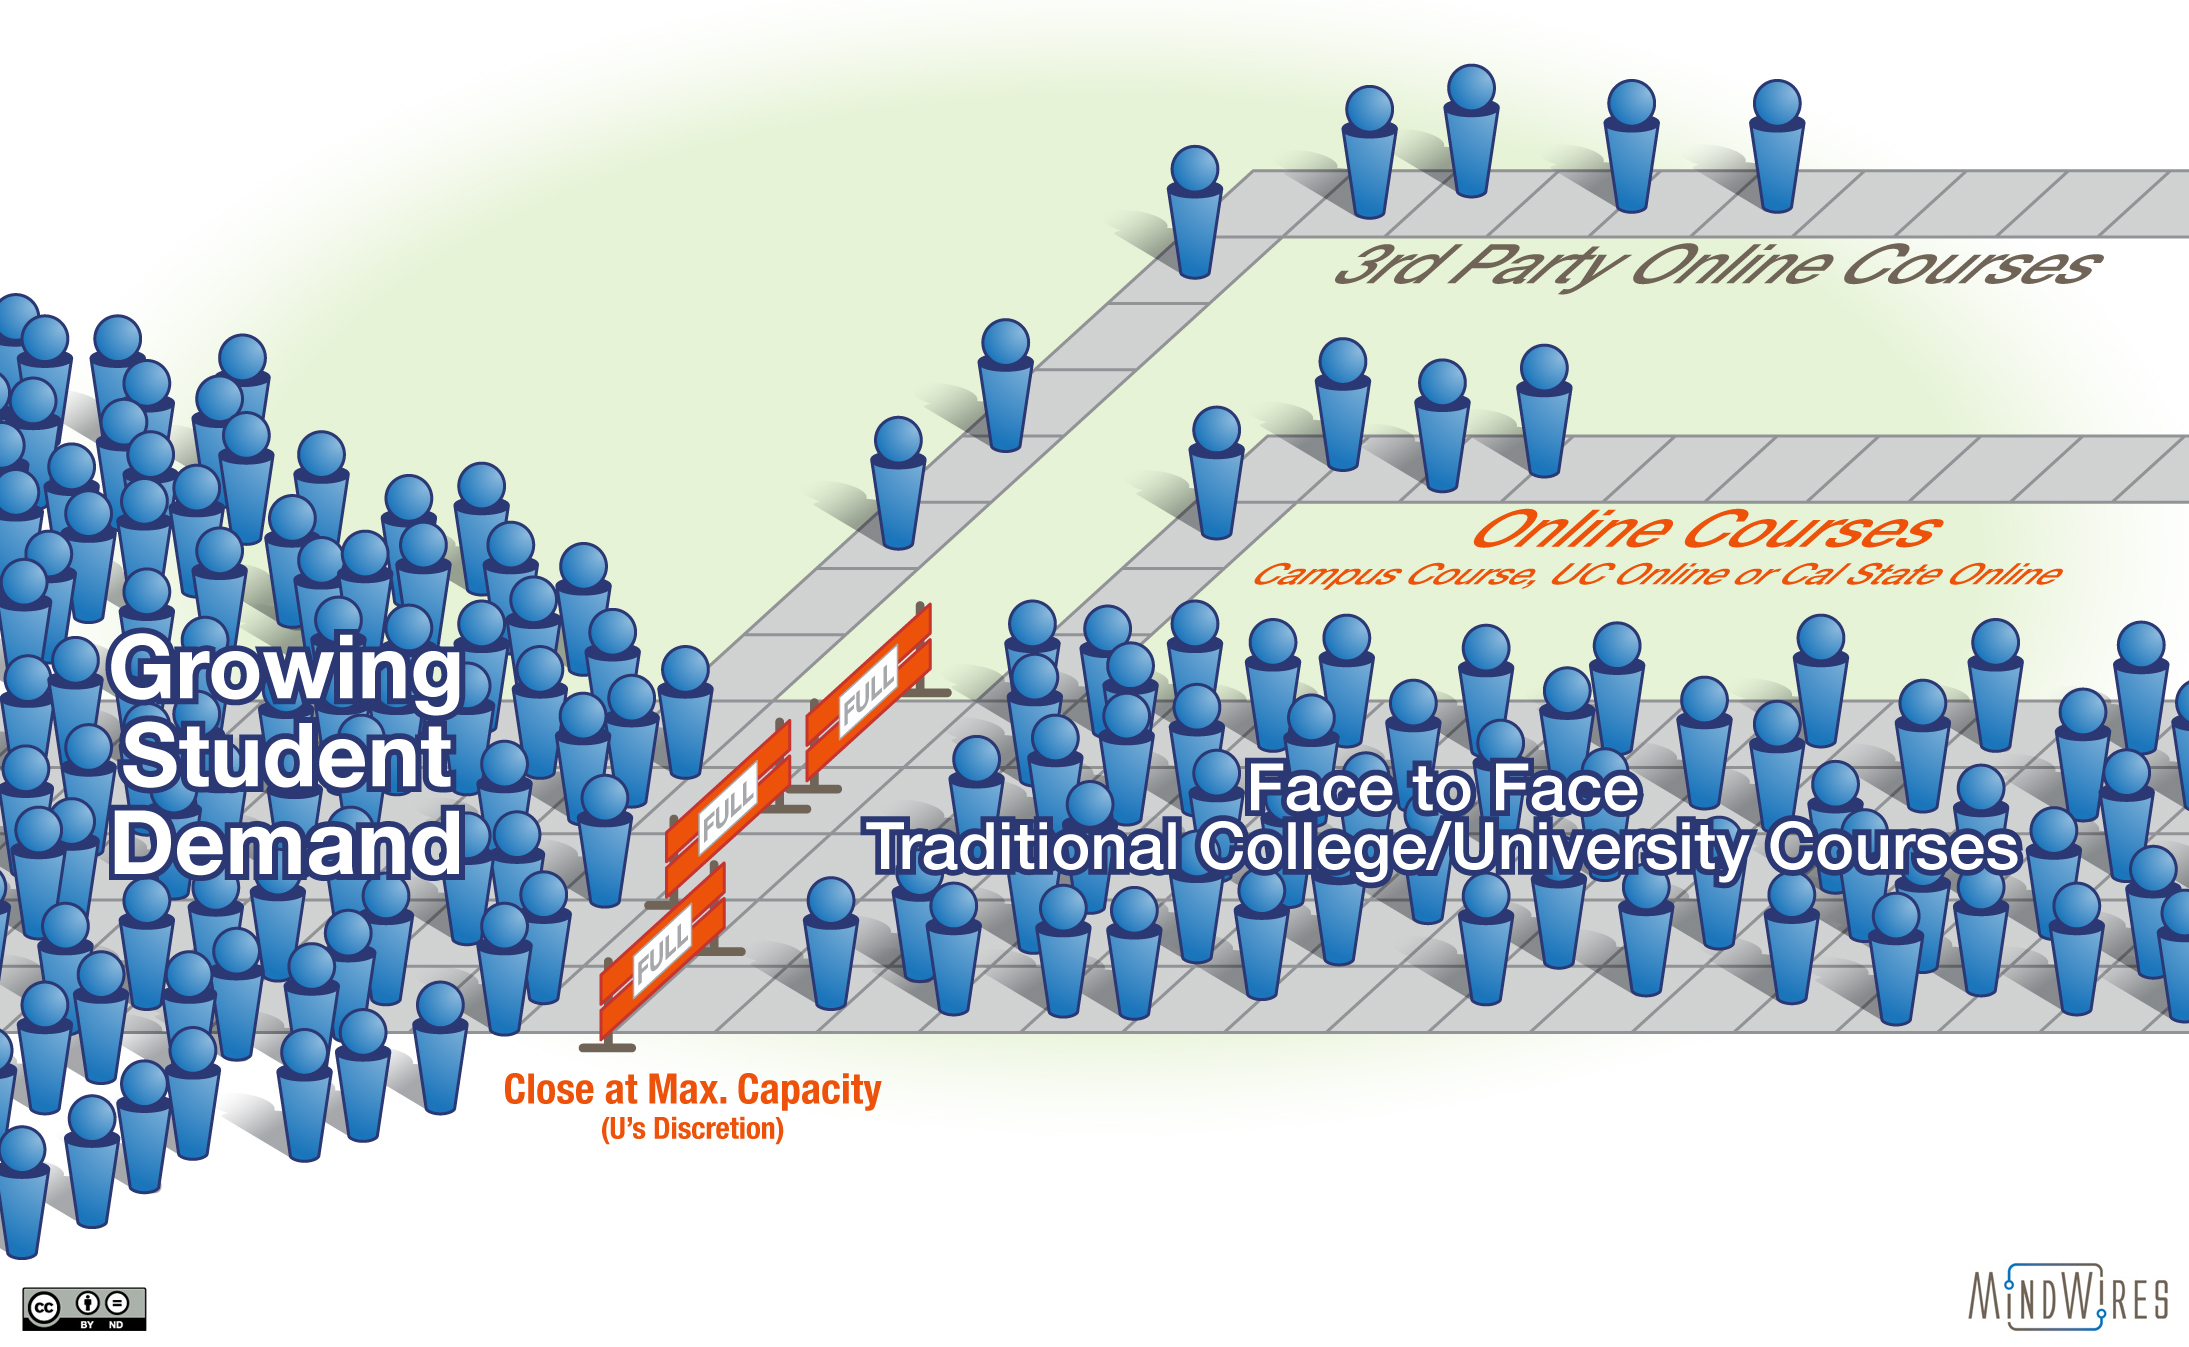 Graphic showing the large number of students not being served and using alternative pathways to serve them.